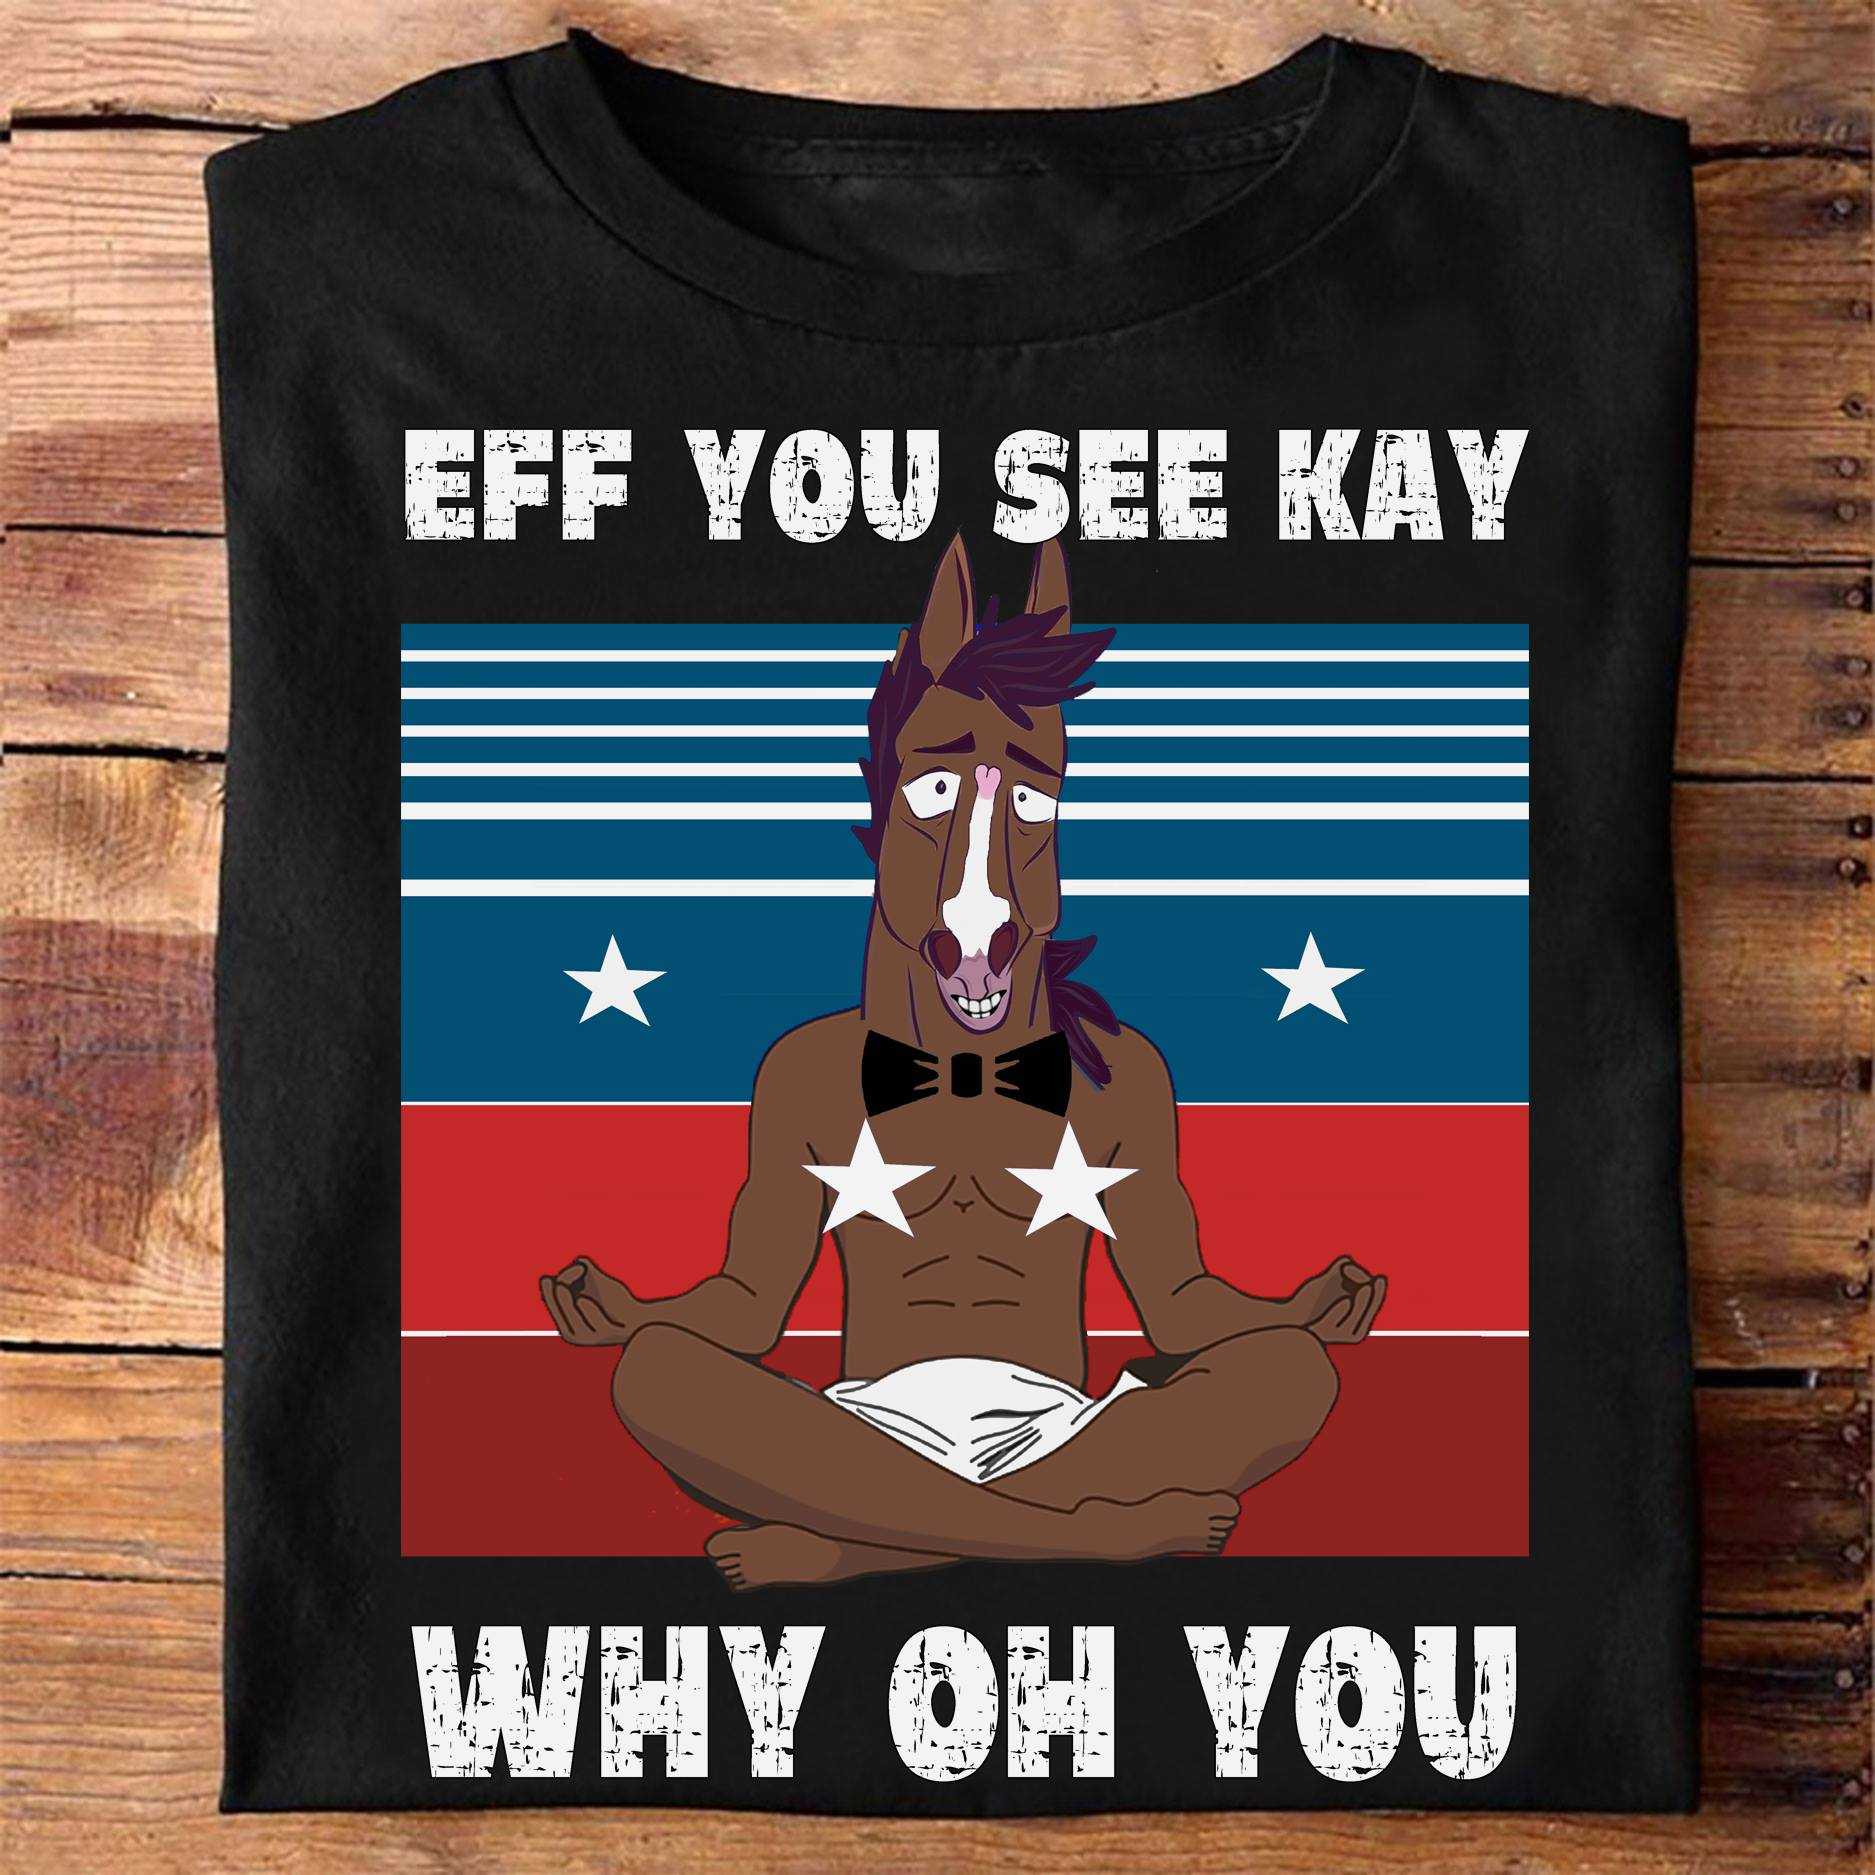 Eff you see kay, why oh you - Doing yoga horse